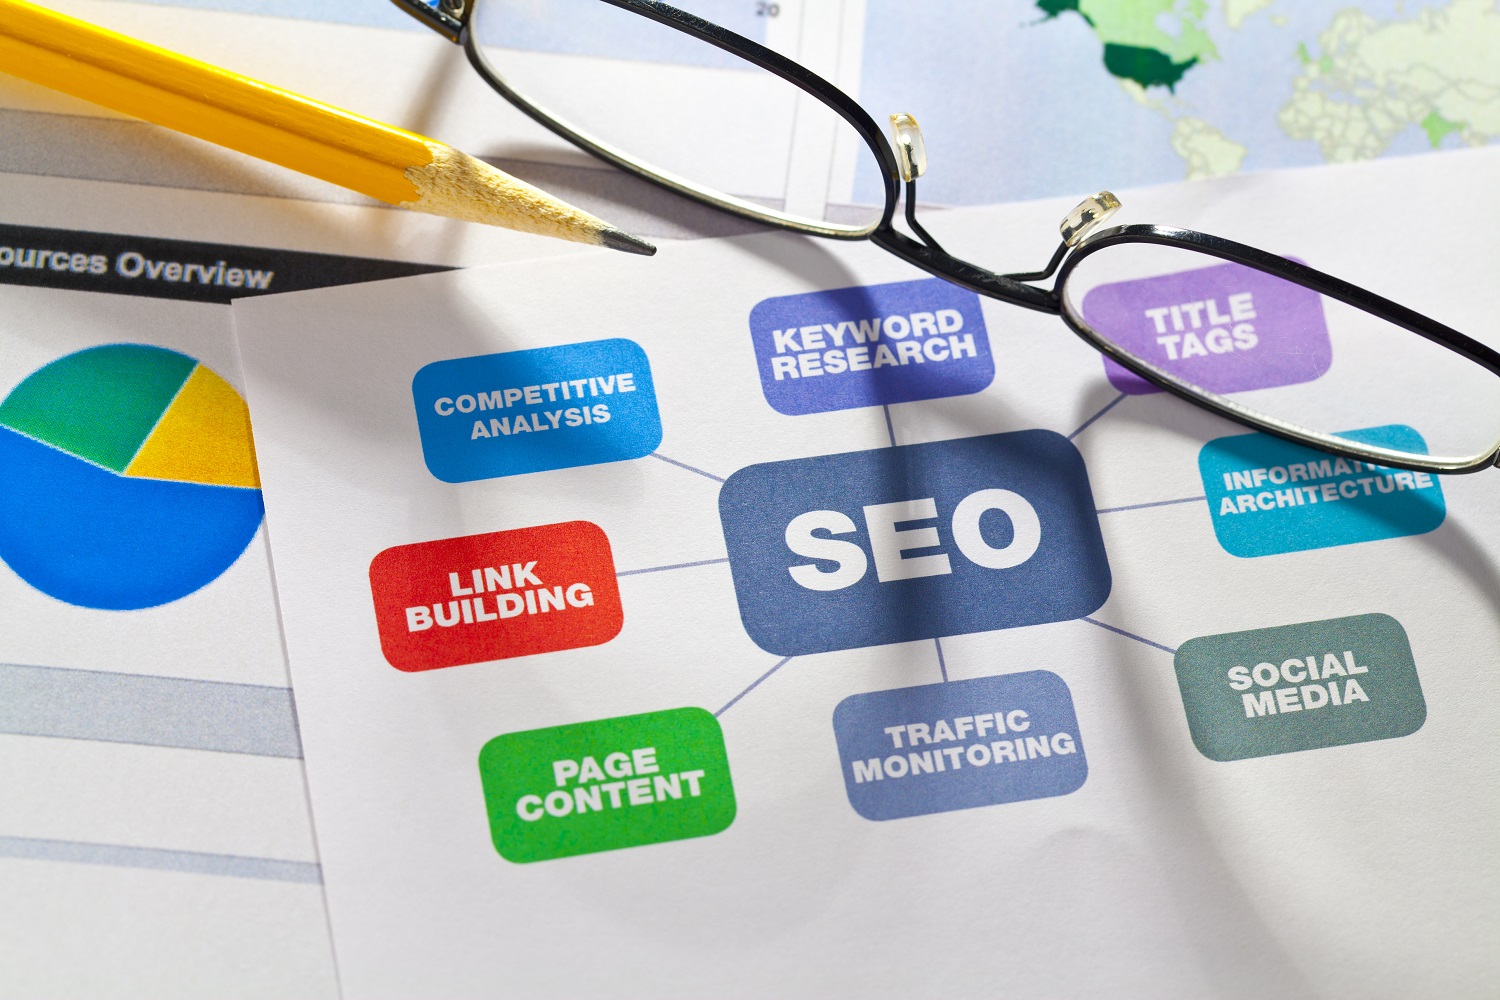 What Is Seo At Crowdswire Ltd